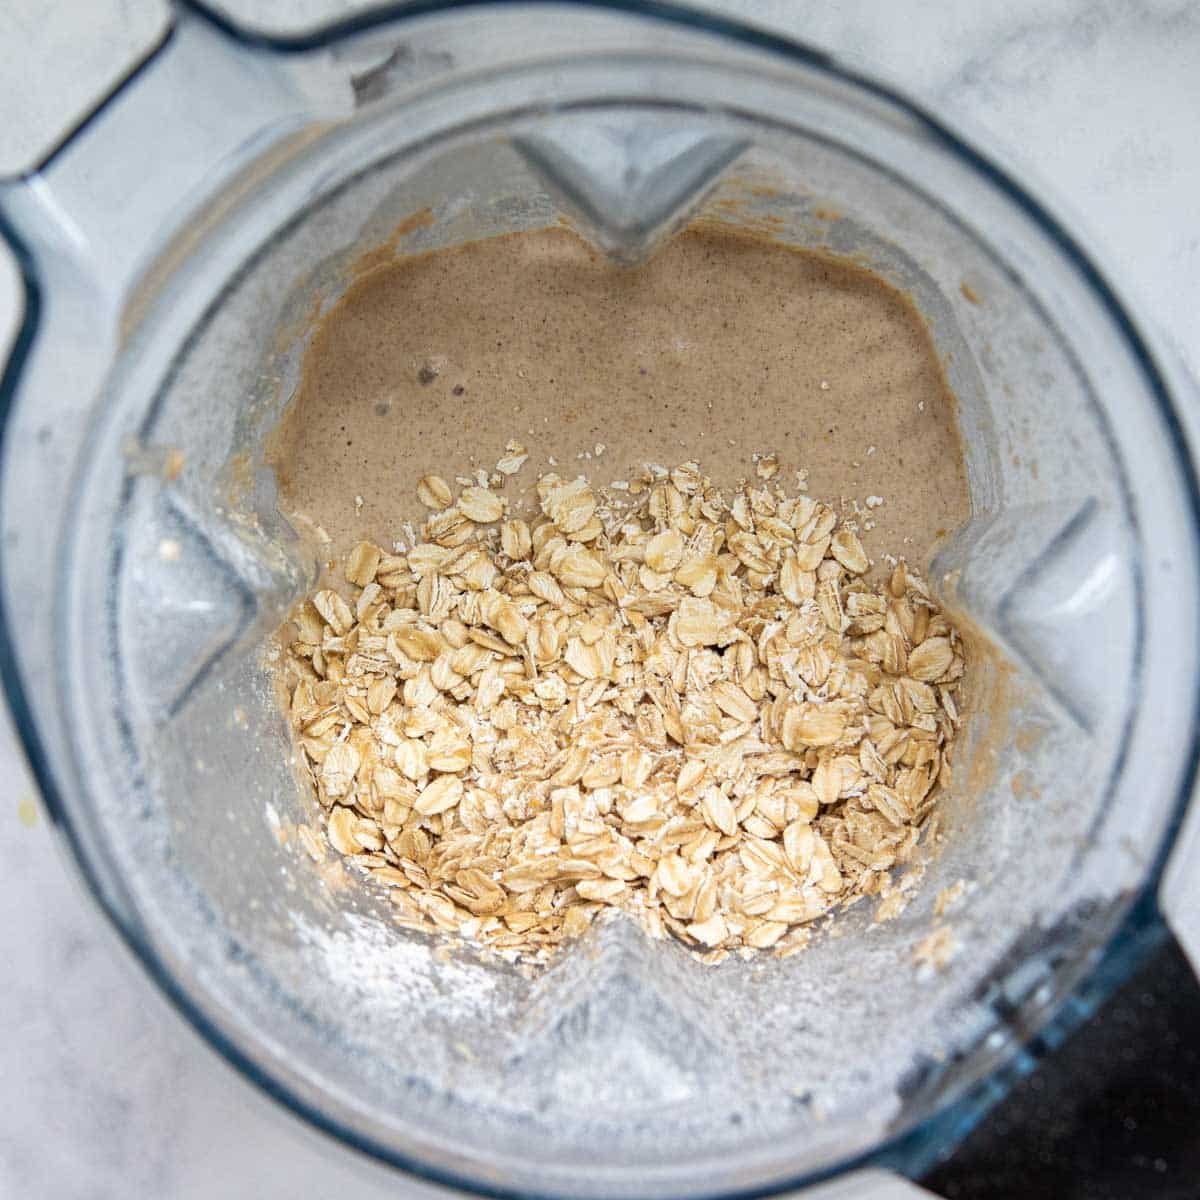 oats added to the muffin batter.